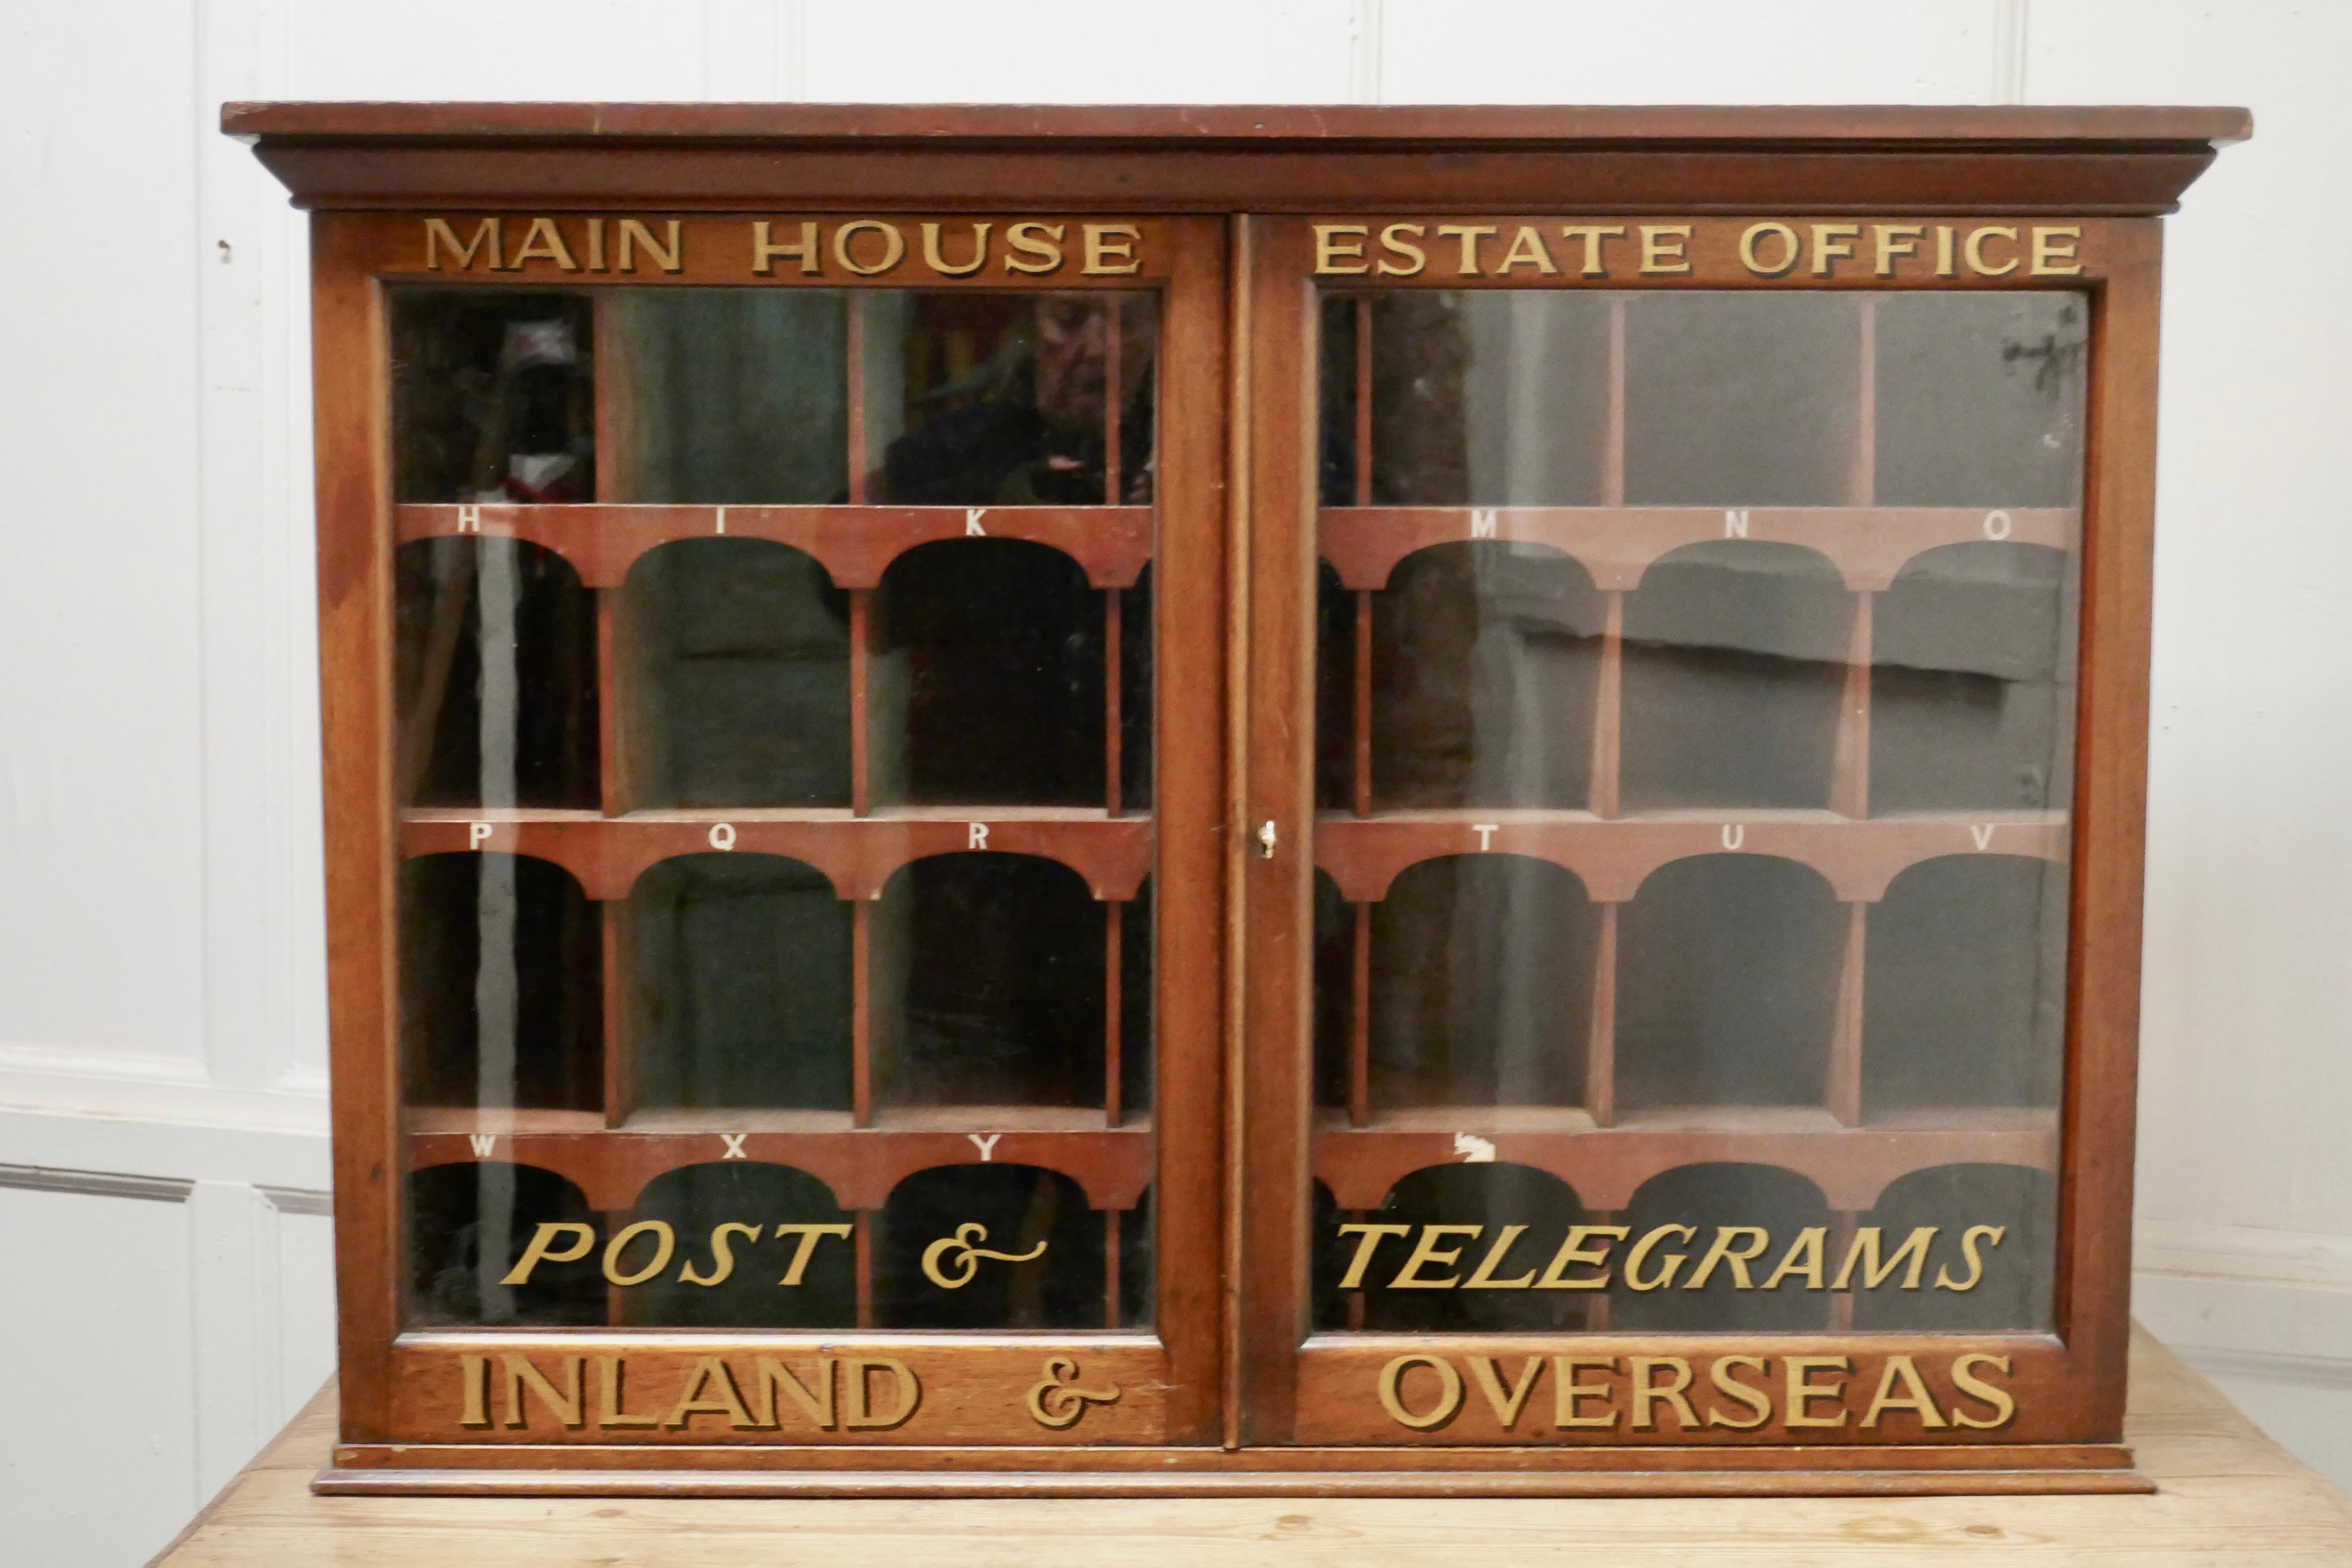 19th century mahogany estate office mail cupboard

This is a wonderful piece, made in mahogany, this is country house piece for the distribution of letters. The 2 glazed doors enclose 28 pigeon holes on the inside 
The cupboard it is in good